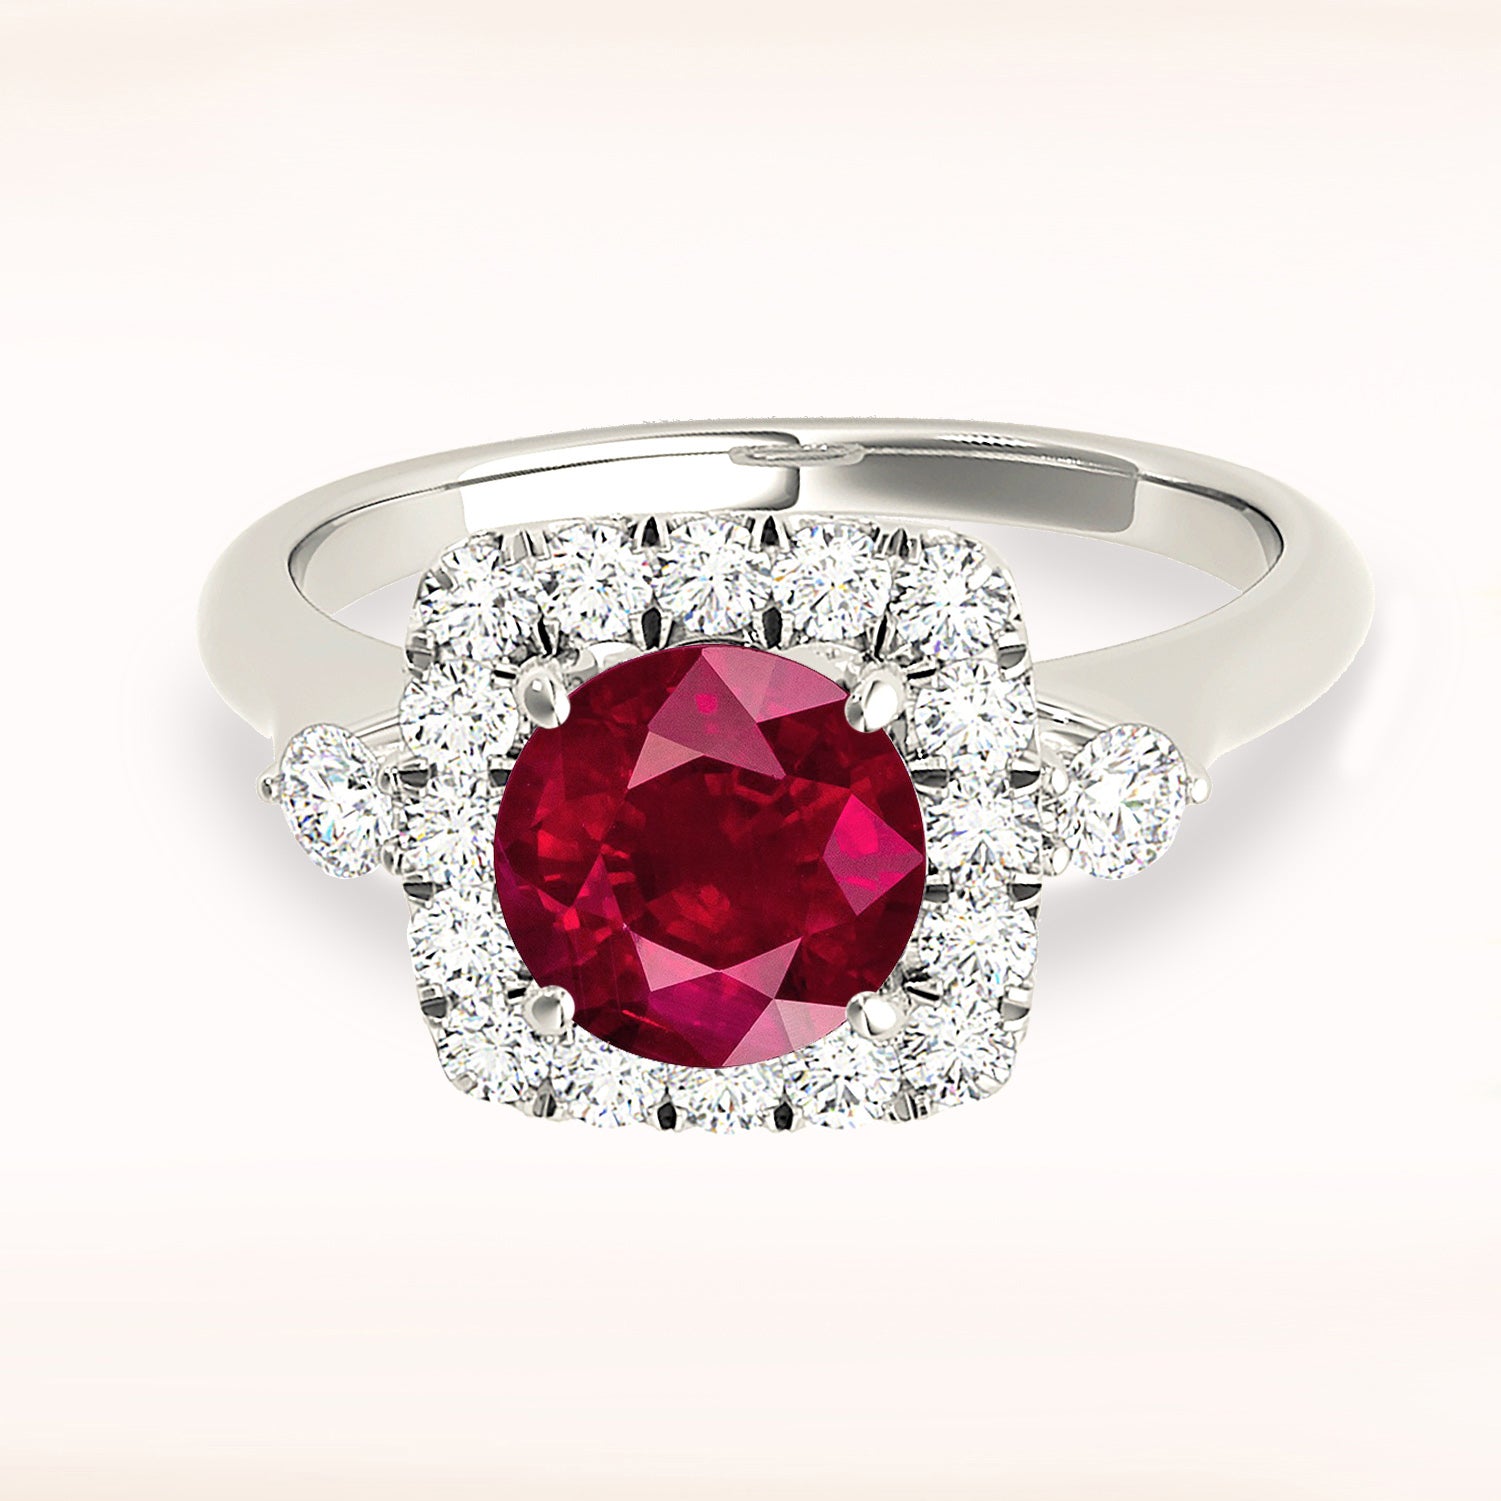 2.35 ct. Genuine Ruby Ring With 0.50 ctw. Diamond Halo And Accent Side Diamonds,Solid Gold Band-VIRABYANI